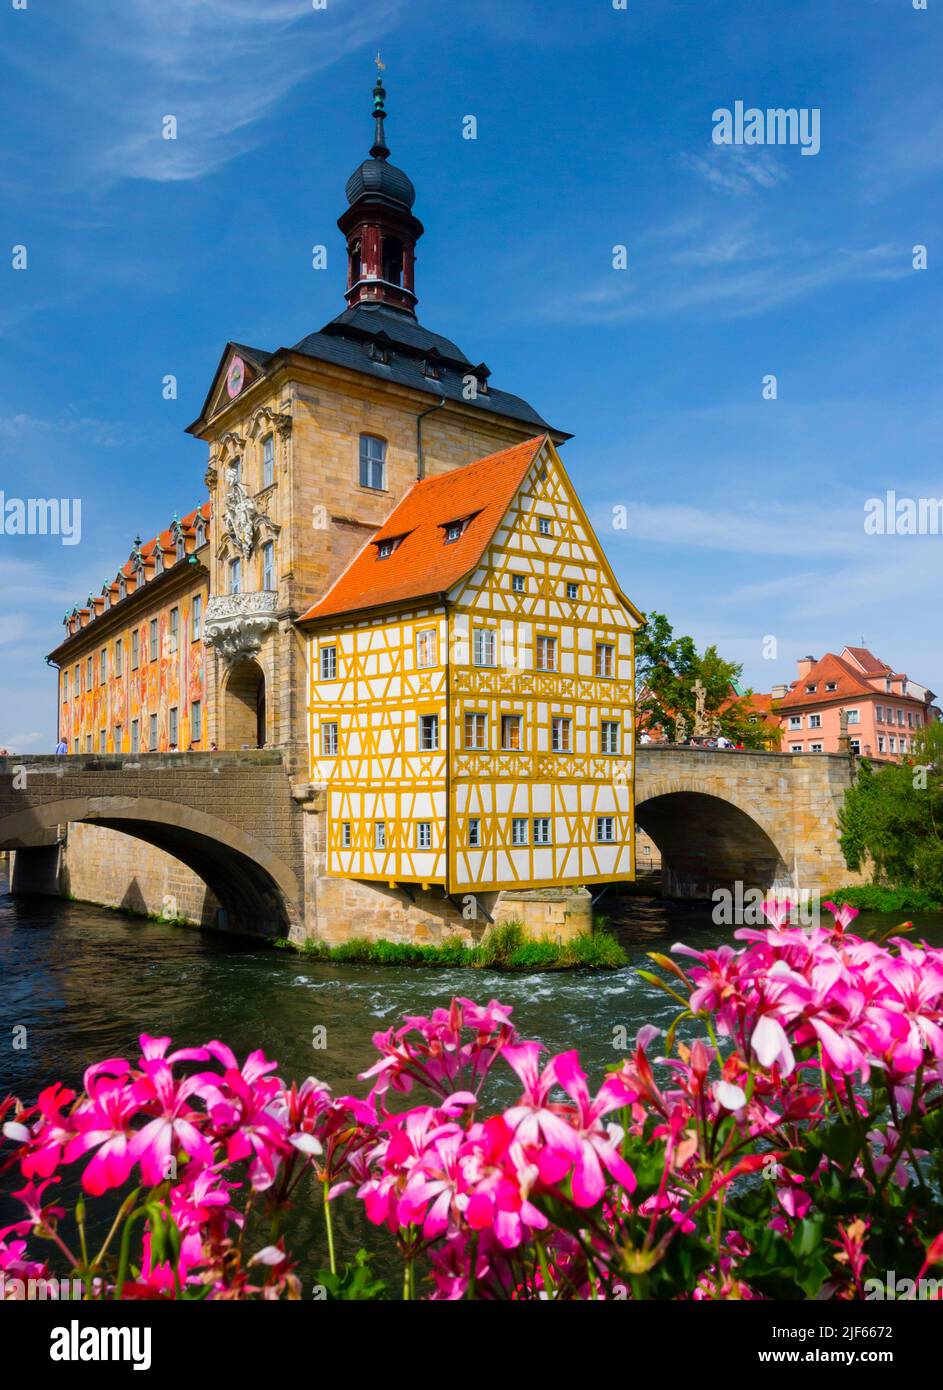 Old town hall or Altes Rathaus in Bamberg Bavaria Germany Stock Photo